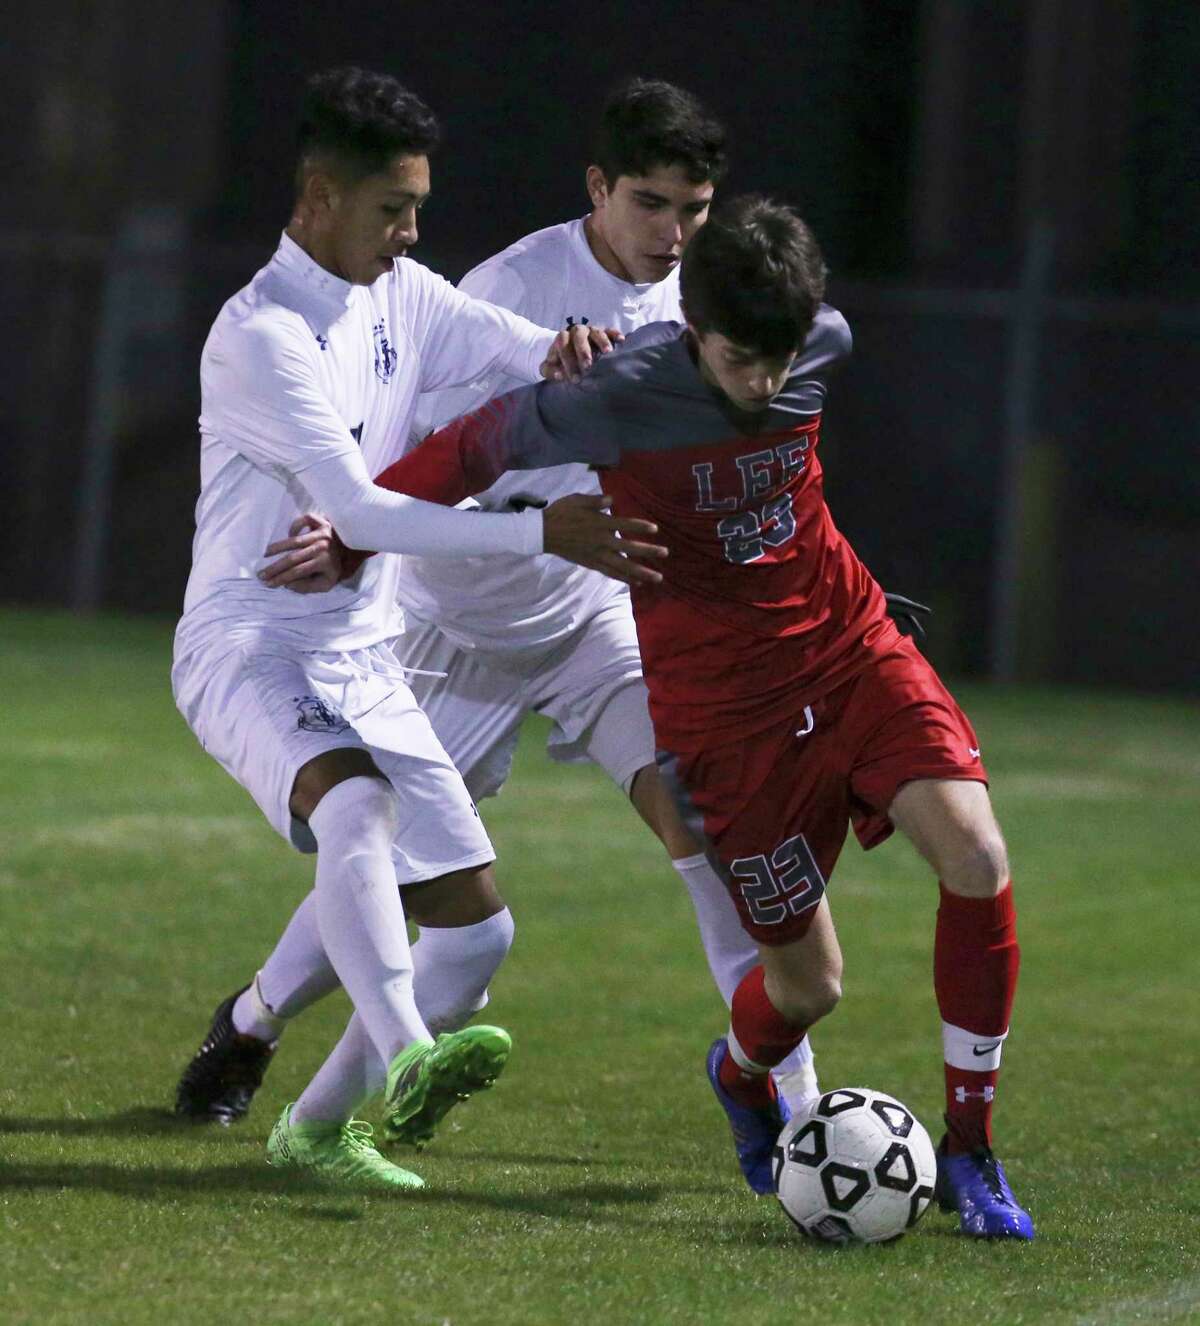 Legacy of Educational Excellence (LEE) player Henry Bowland (23) battles to keep control of the ball against Central Catholic's Angel Bacho (11) and Carlos Melo (04) in boys soccer at Blossom Soccer Complex on Tuesday, Jan. 15, 2019. Central Catholic was No. 1 in the nation last week and is two-time defending TAPPS-I state champion. LEE was a regional finalist a year ago, losing to Reagan 1-0 and falling one win shy of advancing to the UIL Class 6A state tournament. LEE defeated Central Catholic 2-1. (Kin Man Hui/San Antonio Express-News)